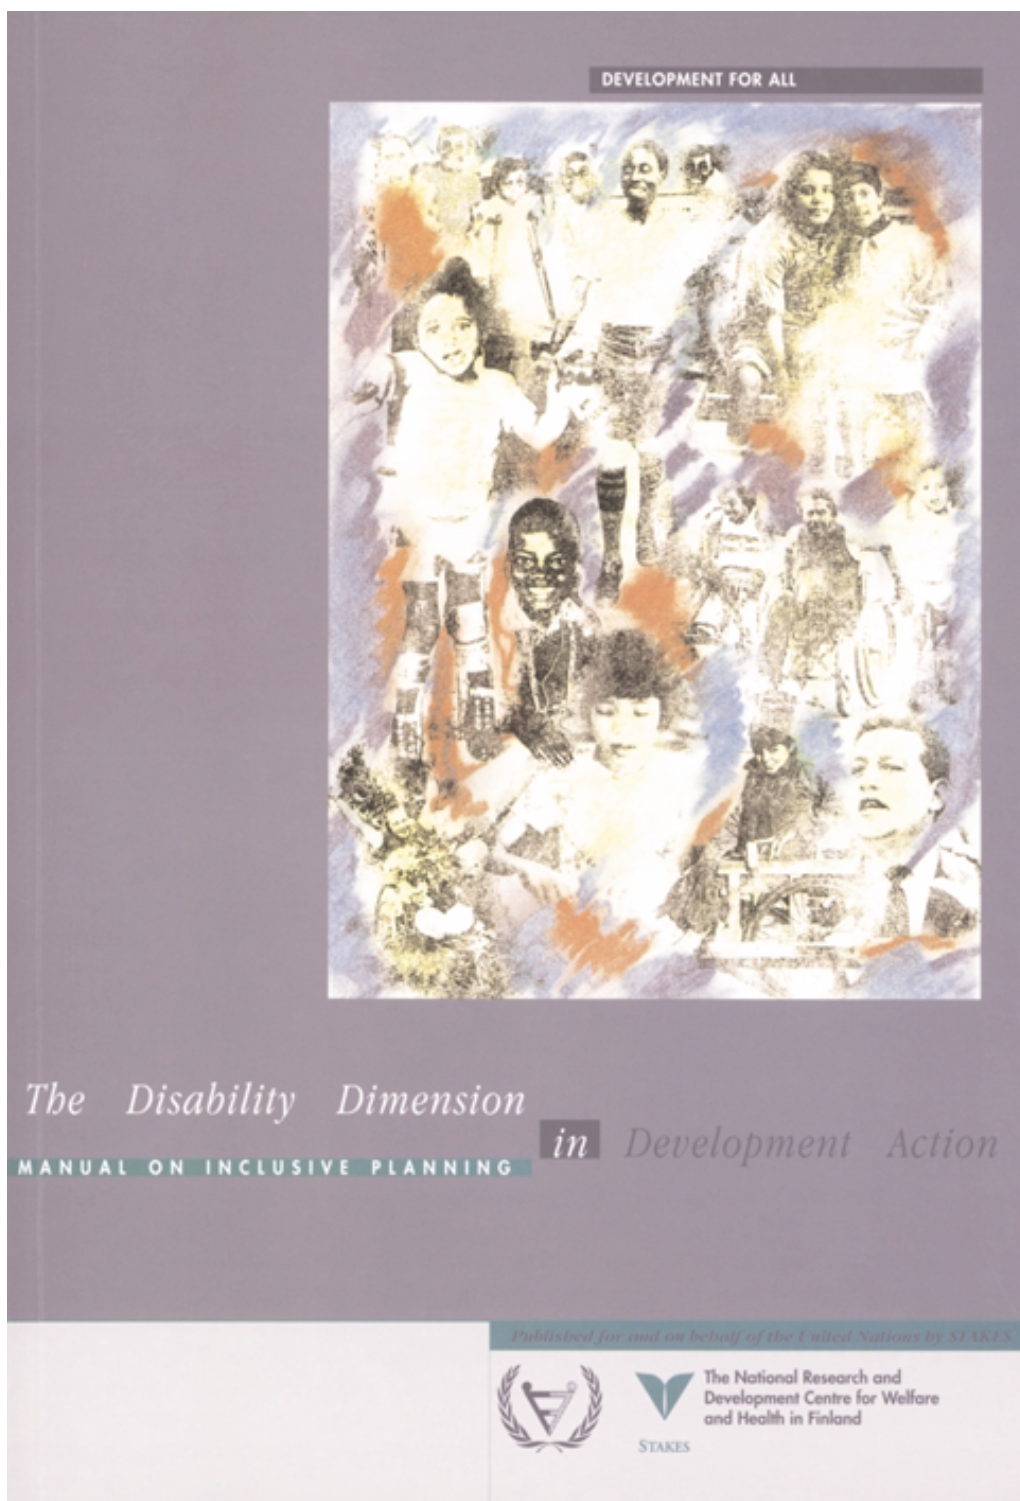 Disability Dimension in Development Action. Manual on Inclusive Planning